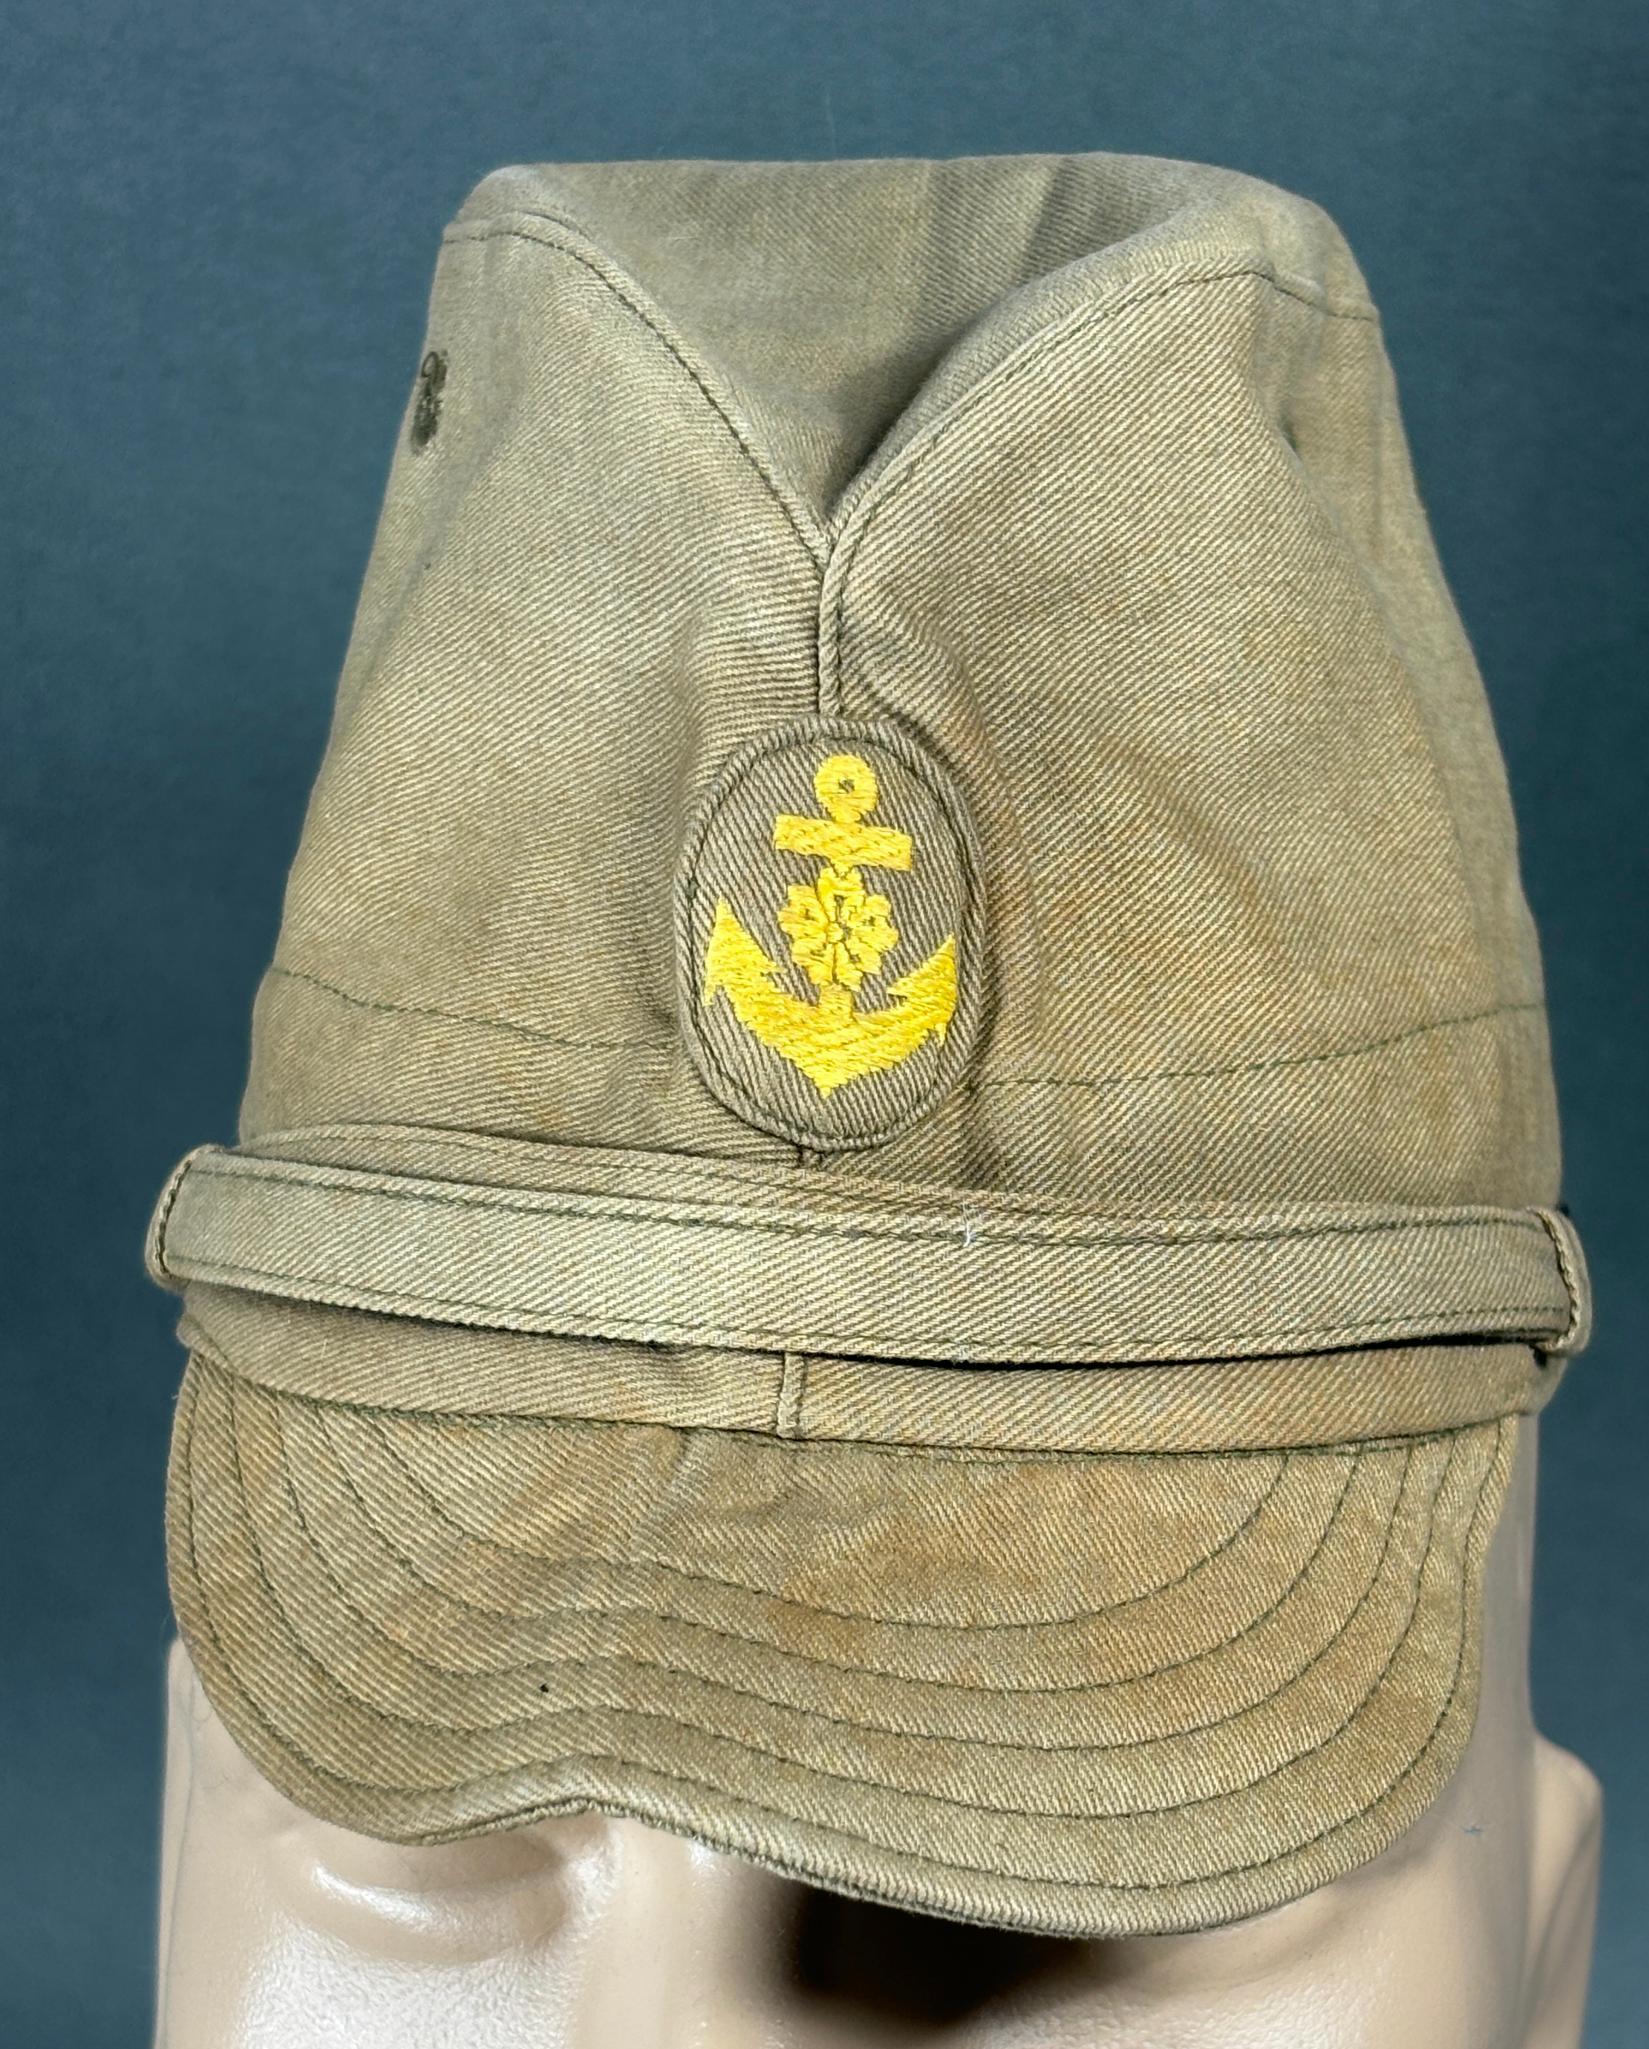 WWII IMPERIAL JAPANESE NAVY IJN PETTY OFFICER CAP